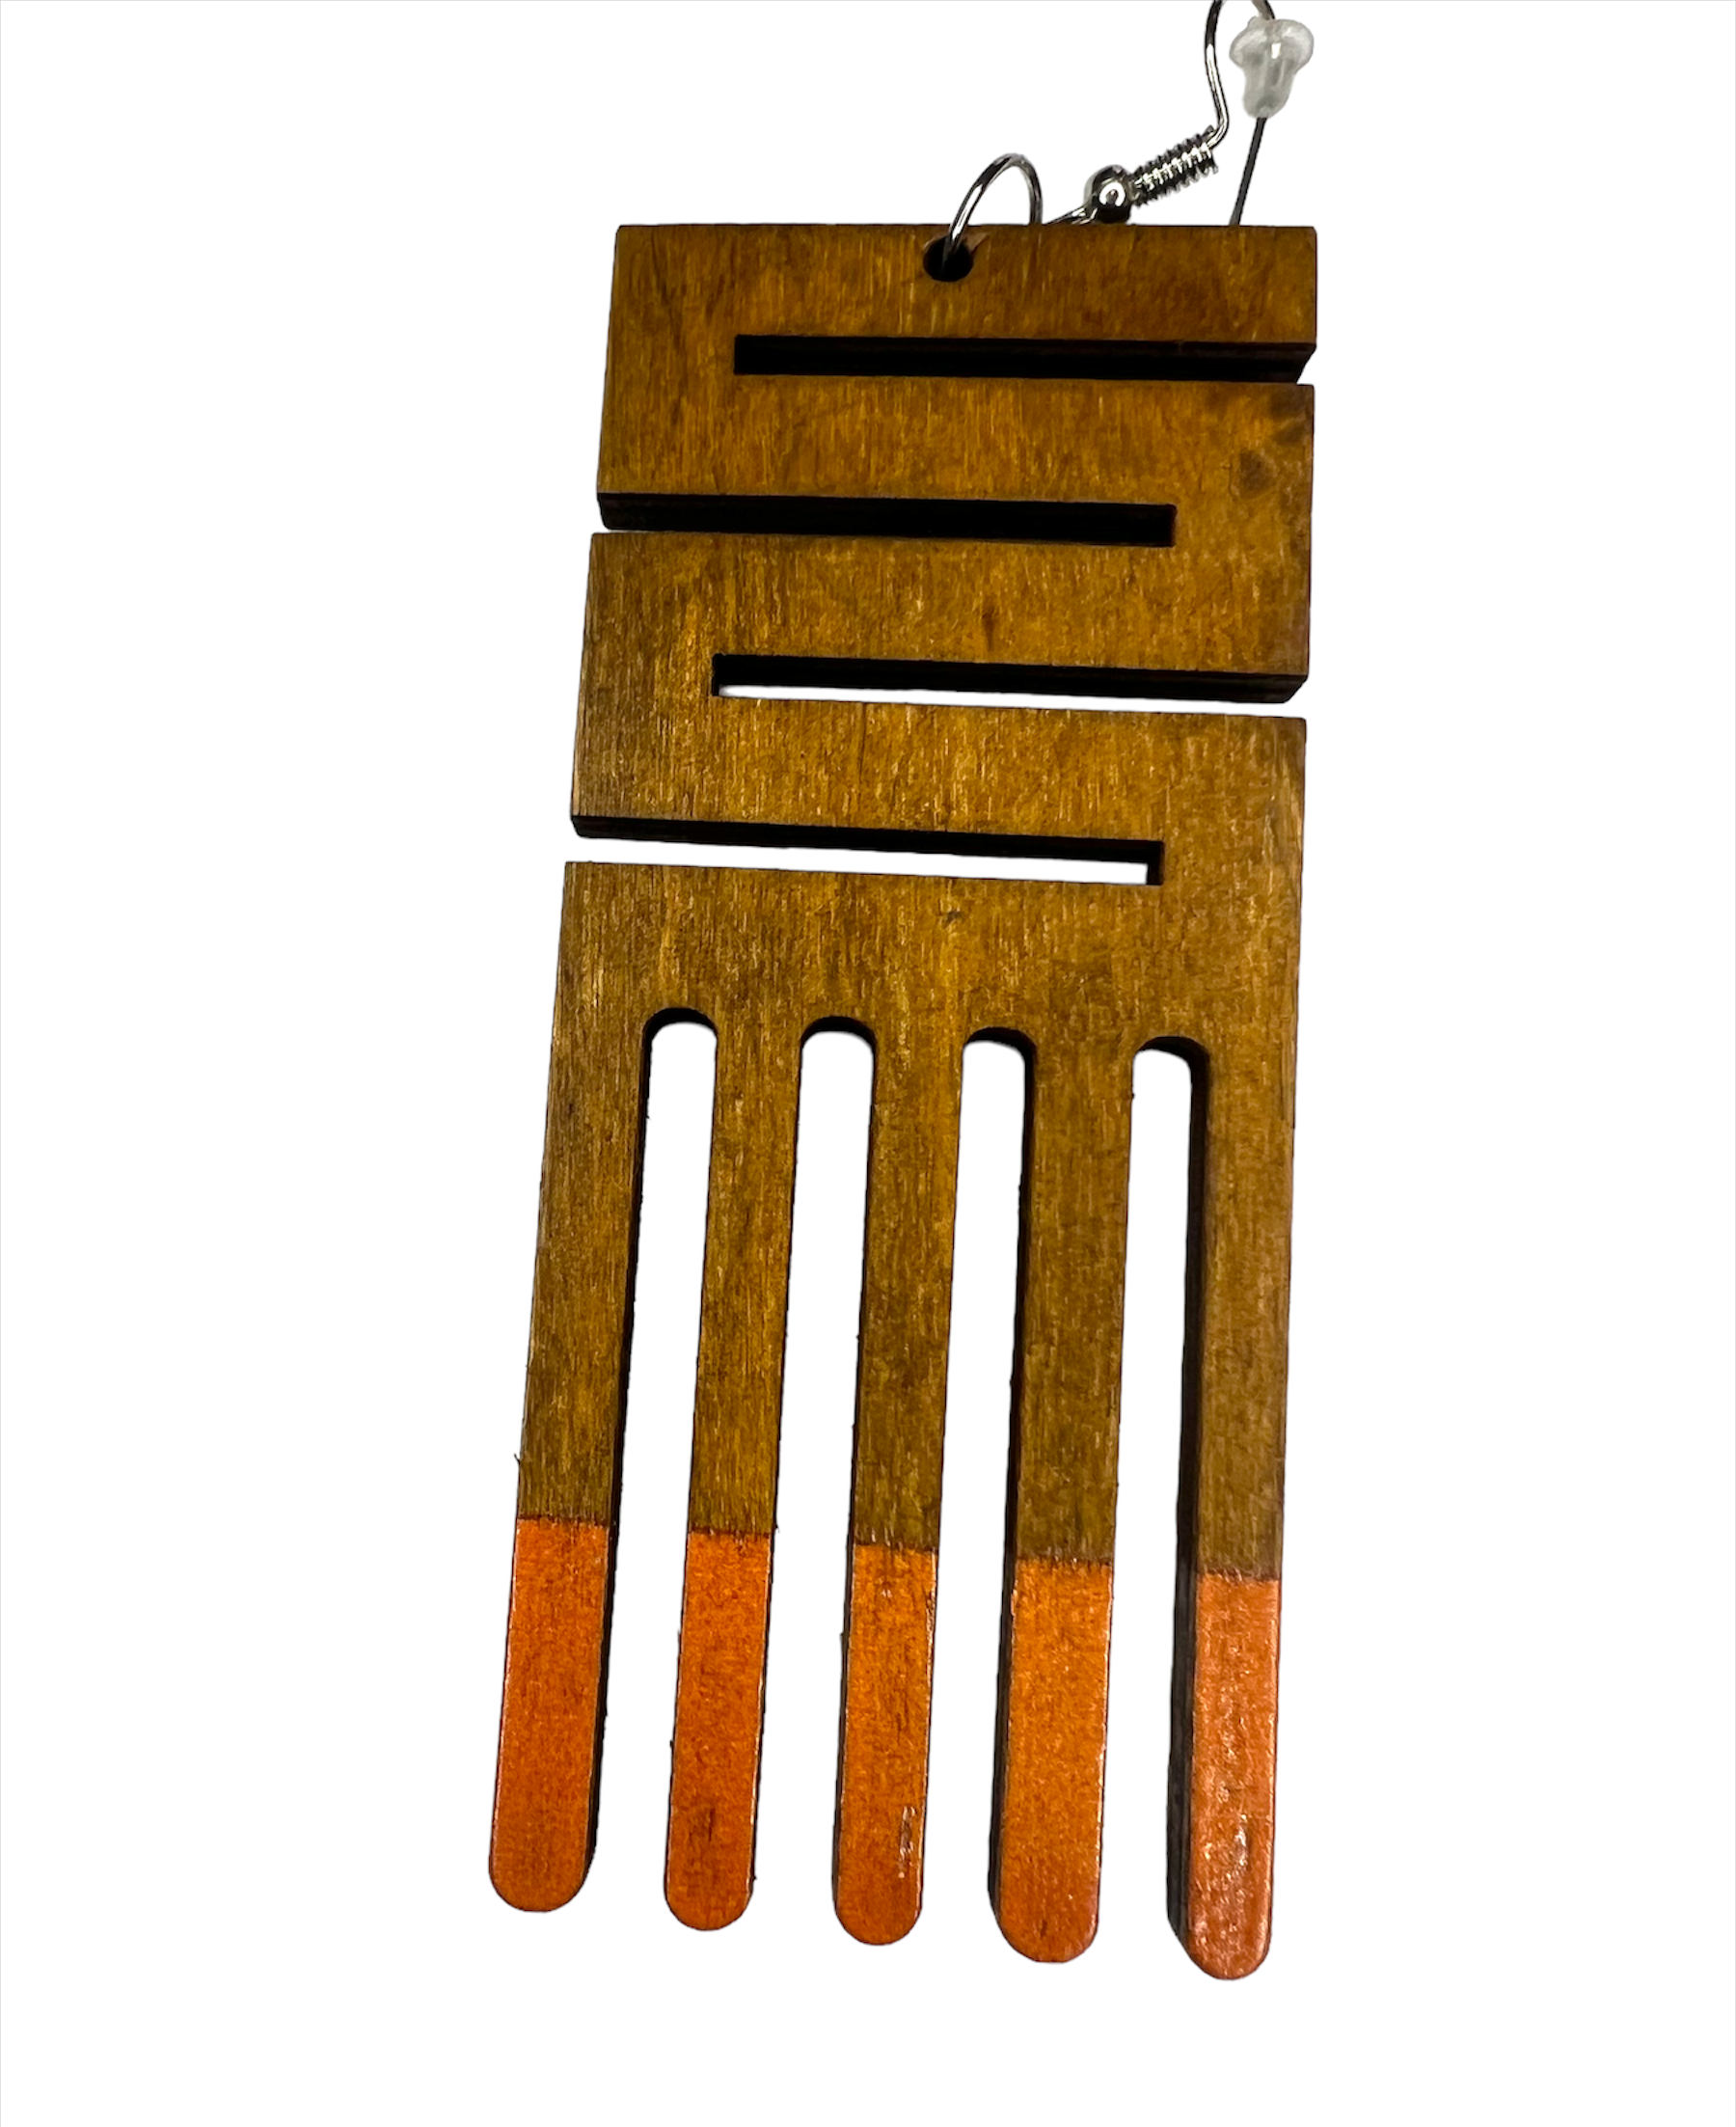 Natural wood dangling afro comb earring with maze-cut handle design and orange teeth; closeup